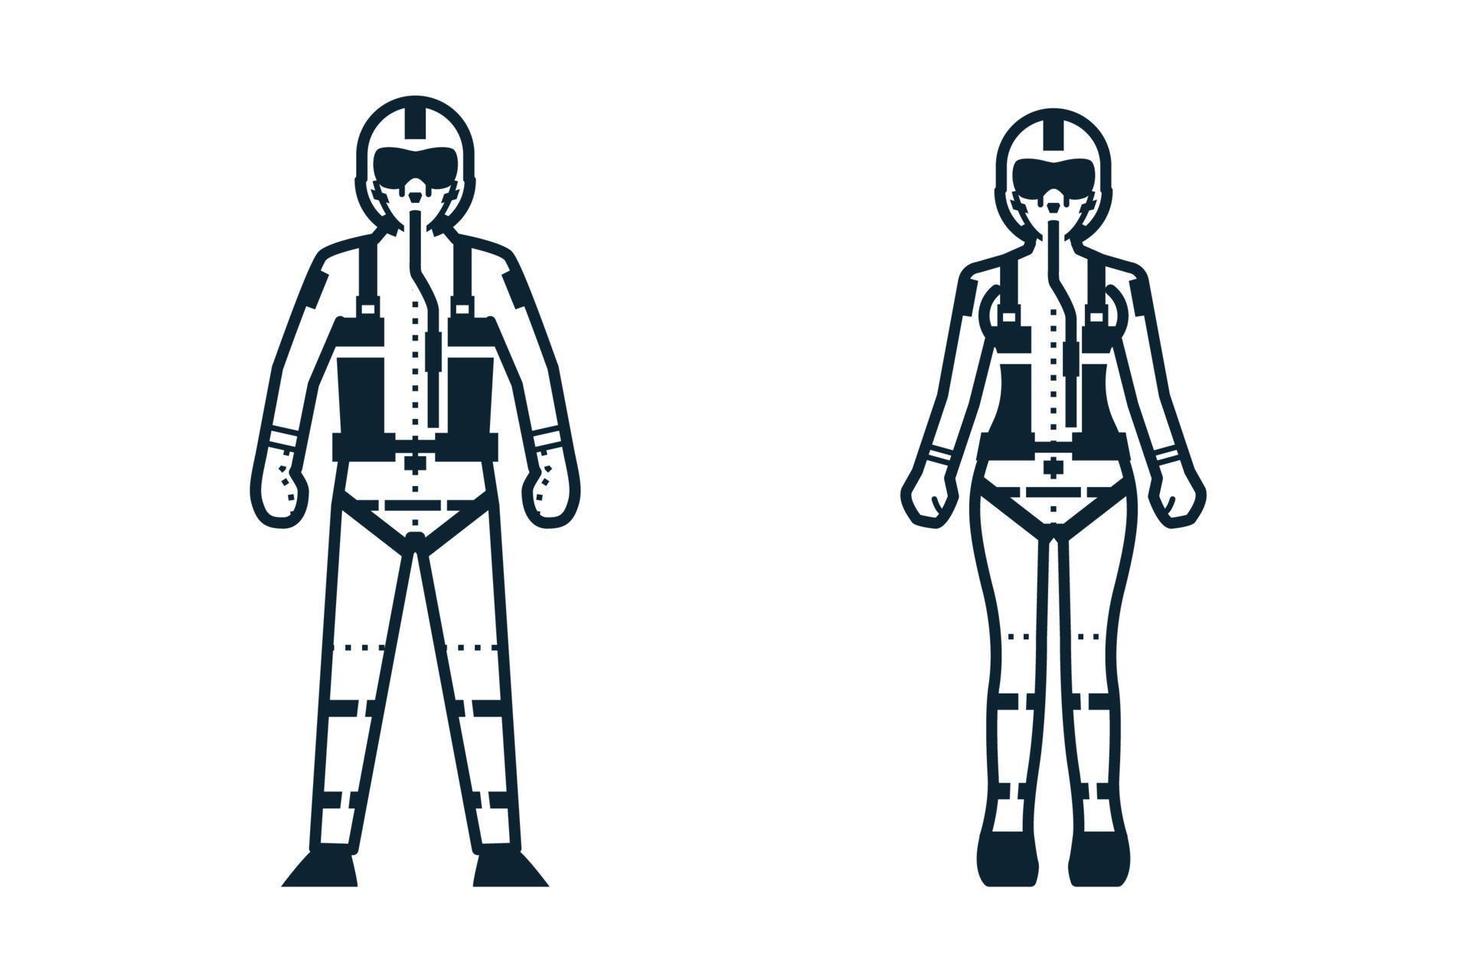 Pilot, Uniform and People icons vector